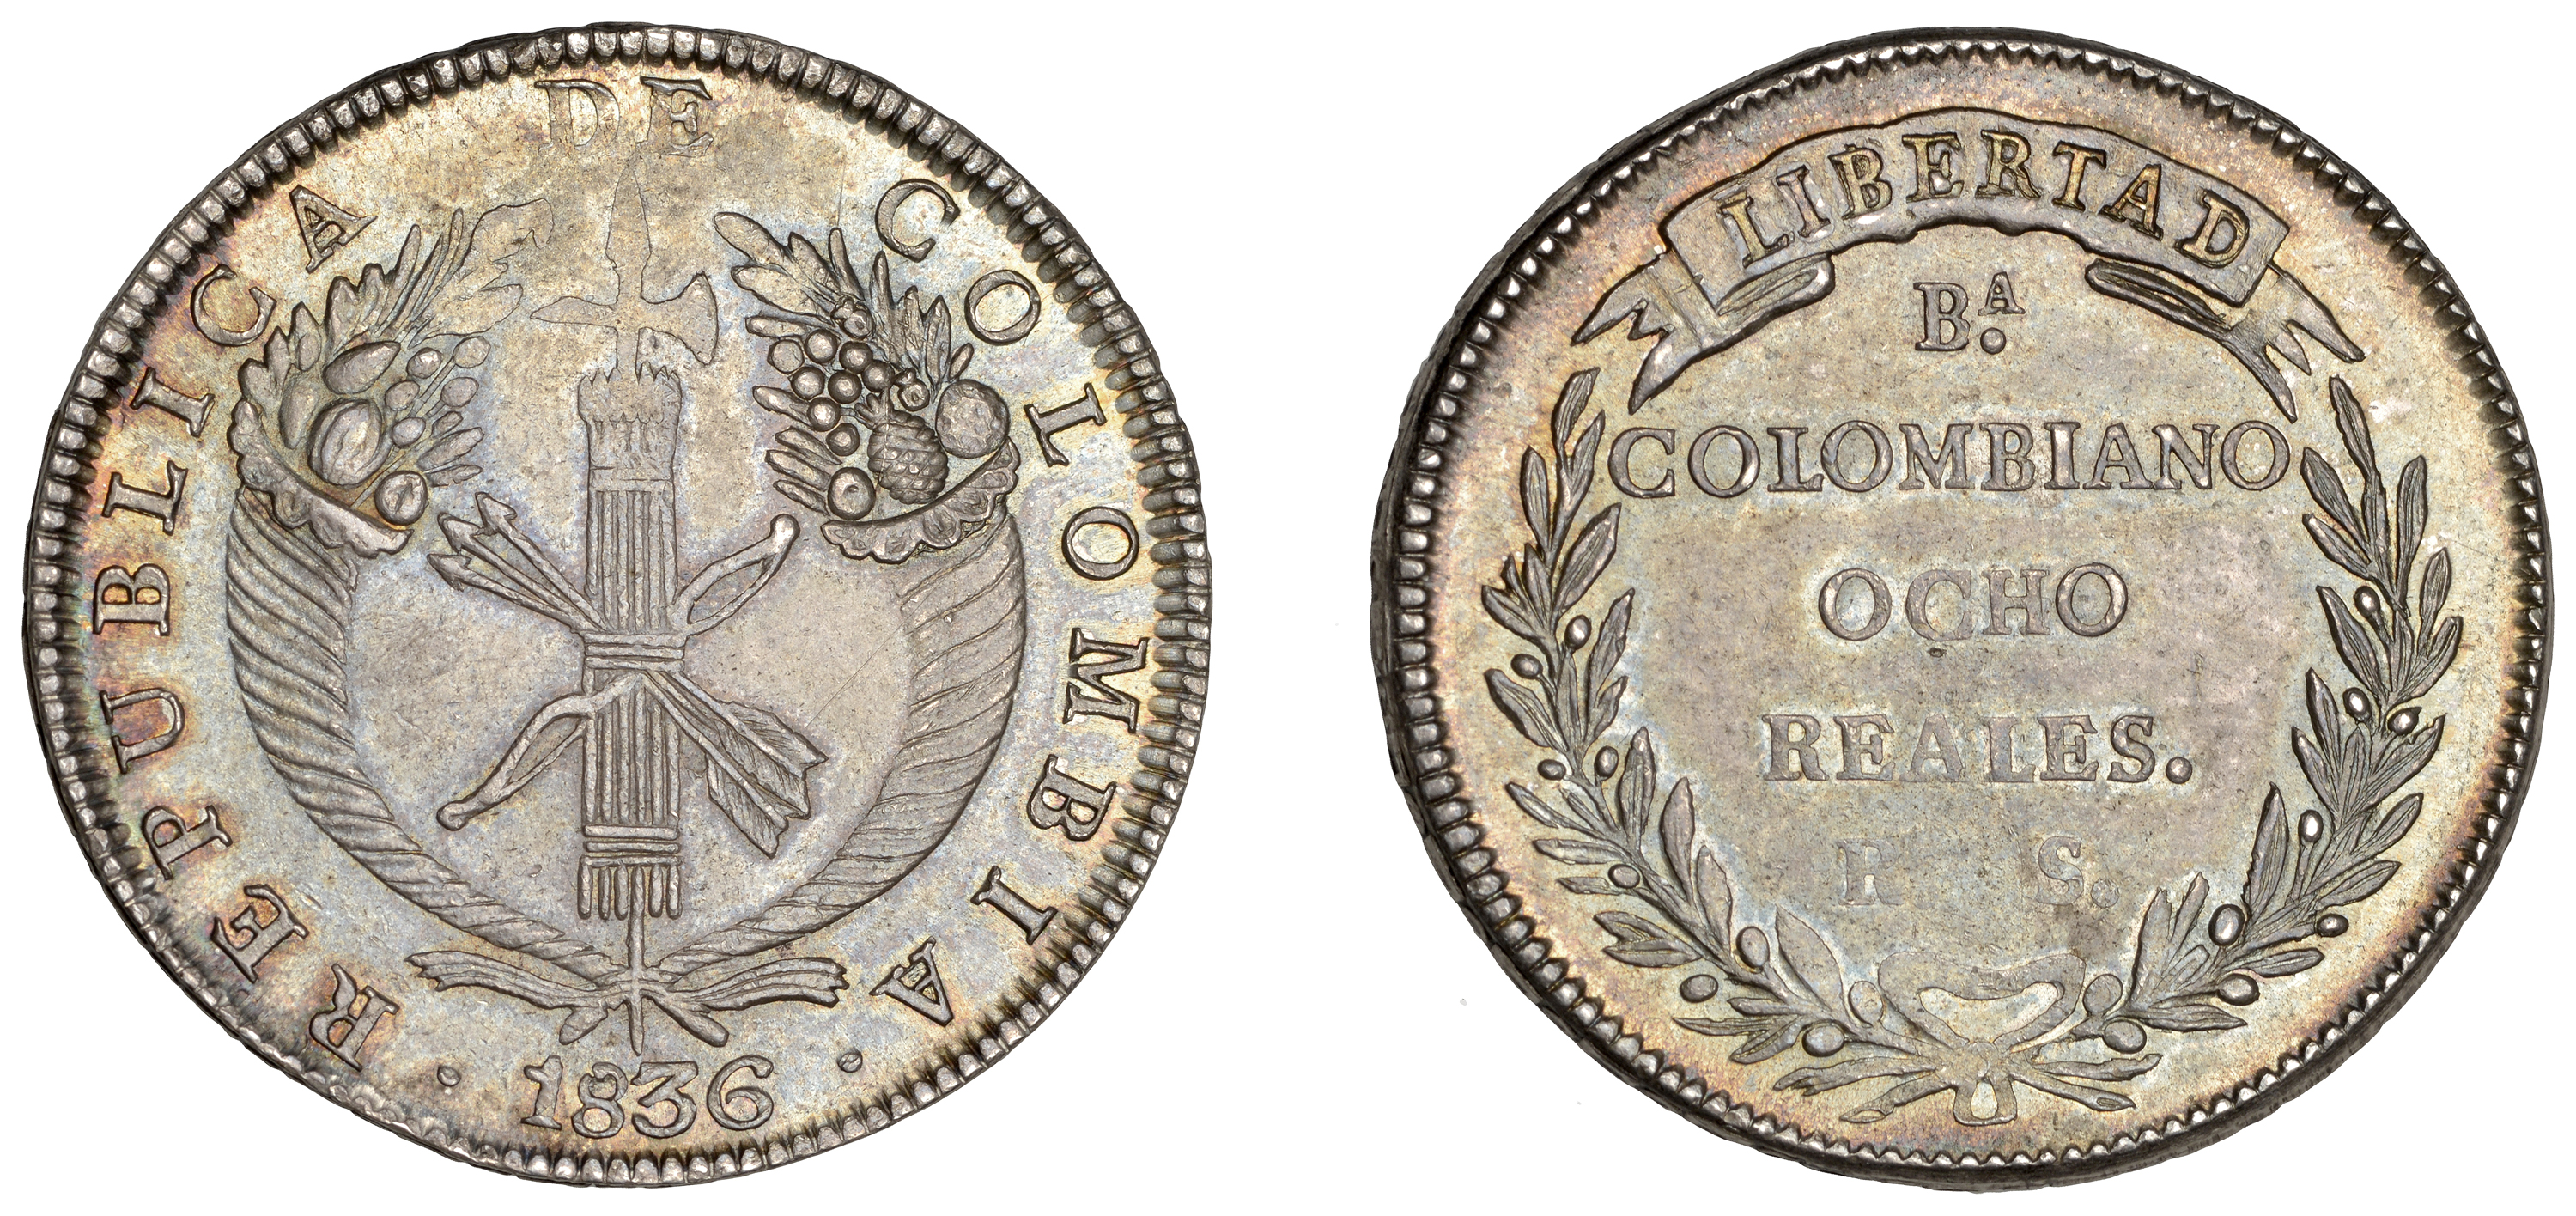 Colombia, Republic, 8 Reales, 1836rs, BogotÃ¡ (KM 89). Extremely fine with some toning [slabb...